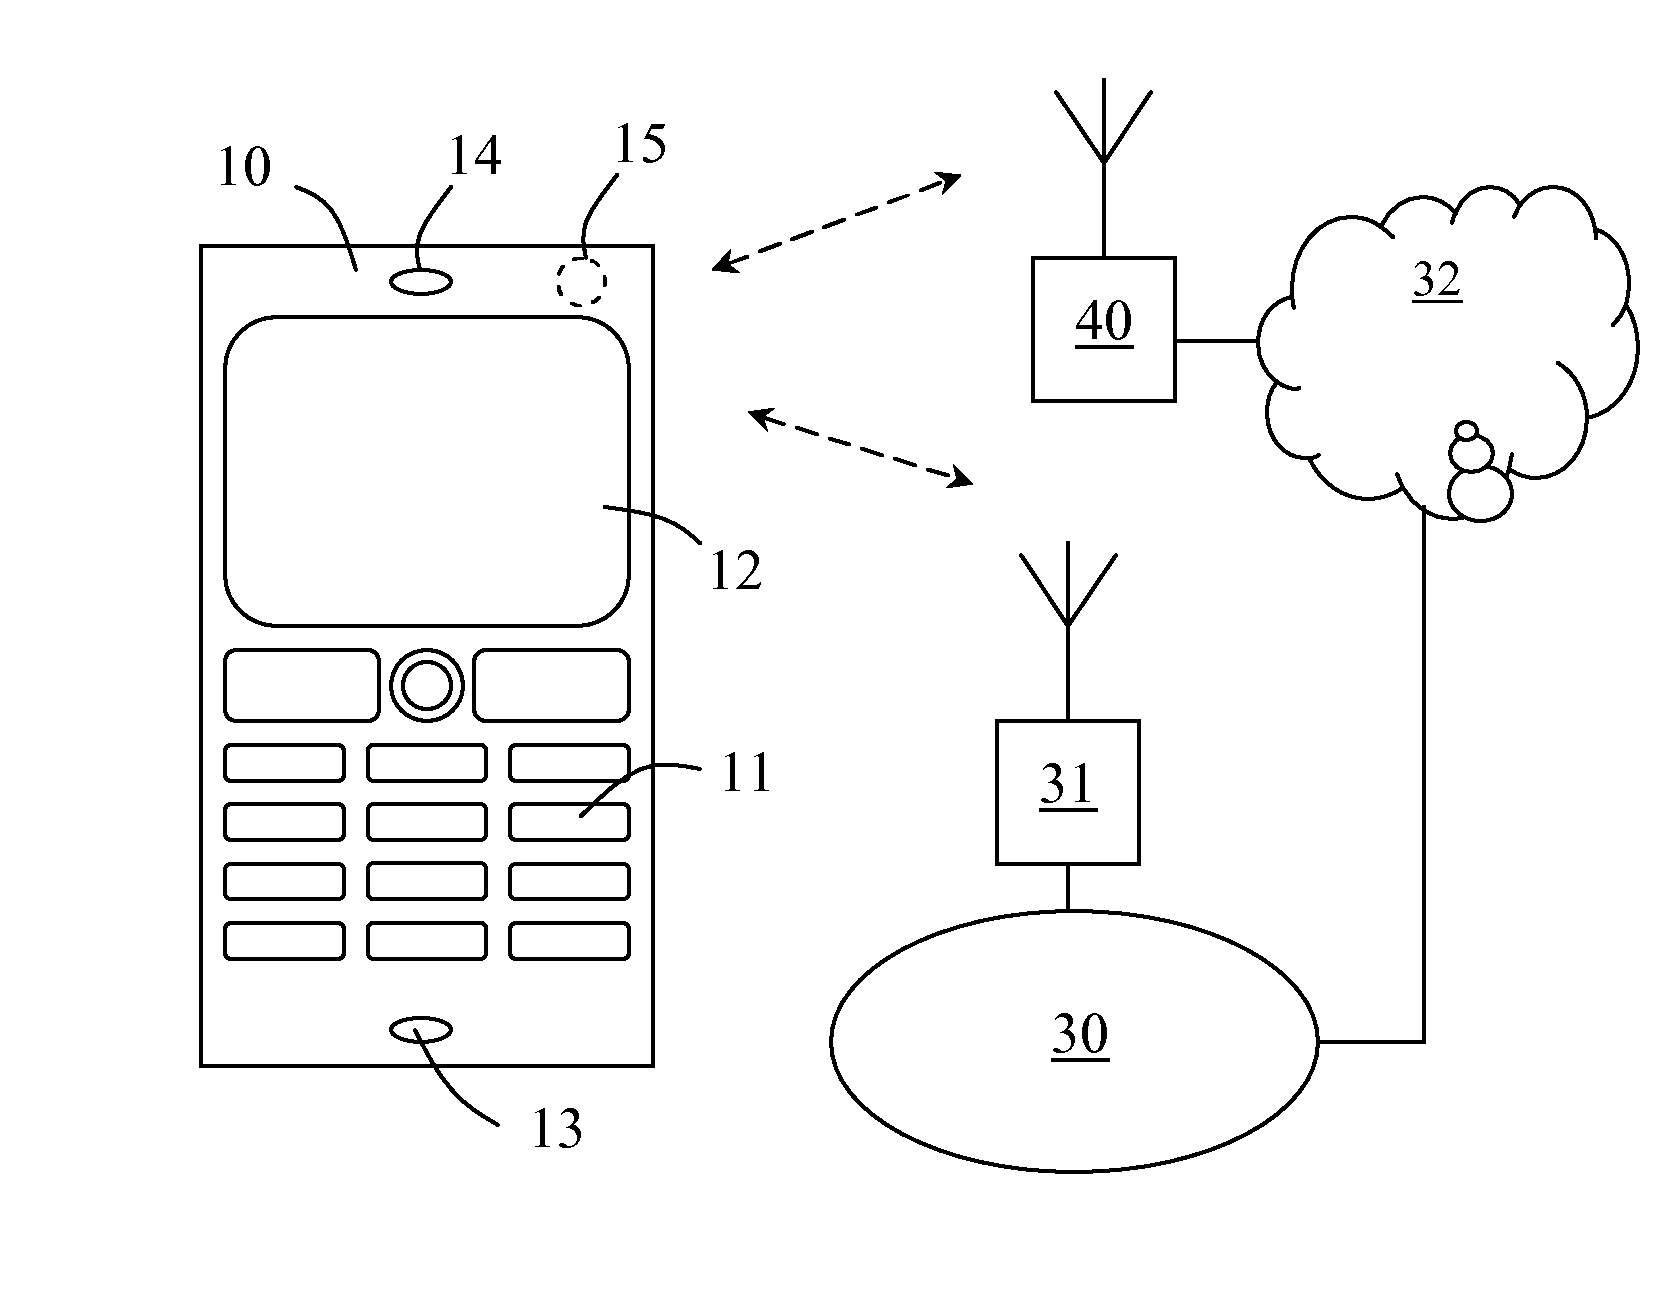 Method for storing and accessing data